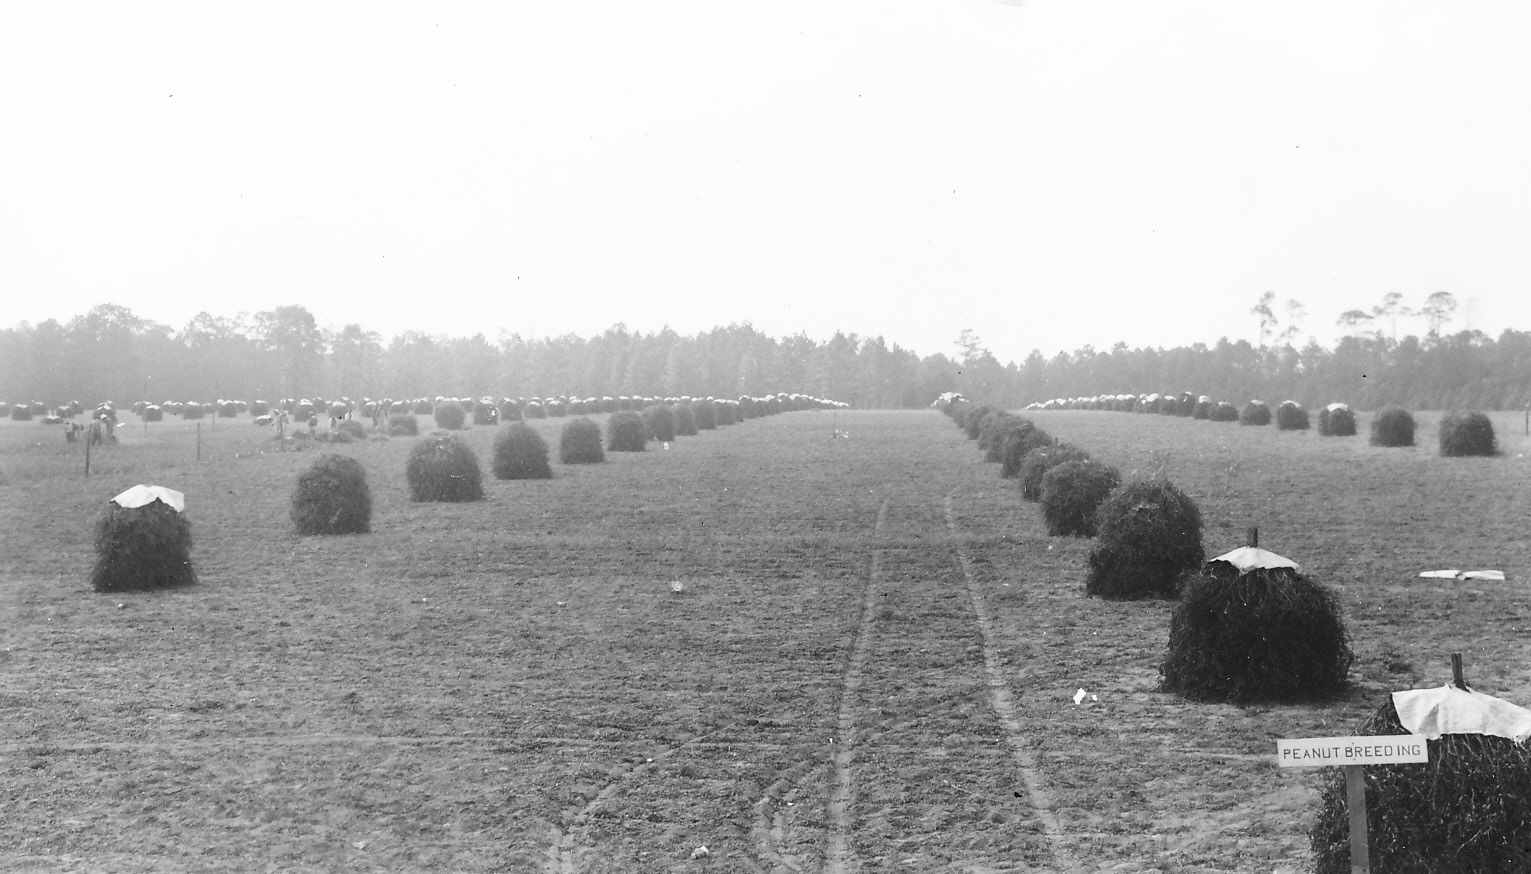 A black and white photo of a peanut field, marked by a sign "peanut breeding"